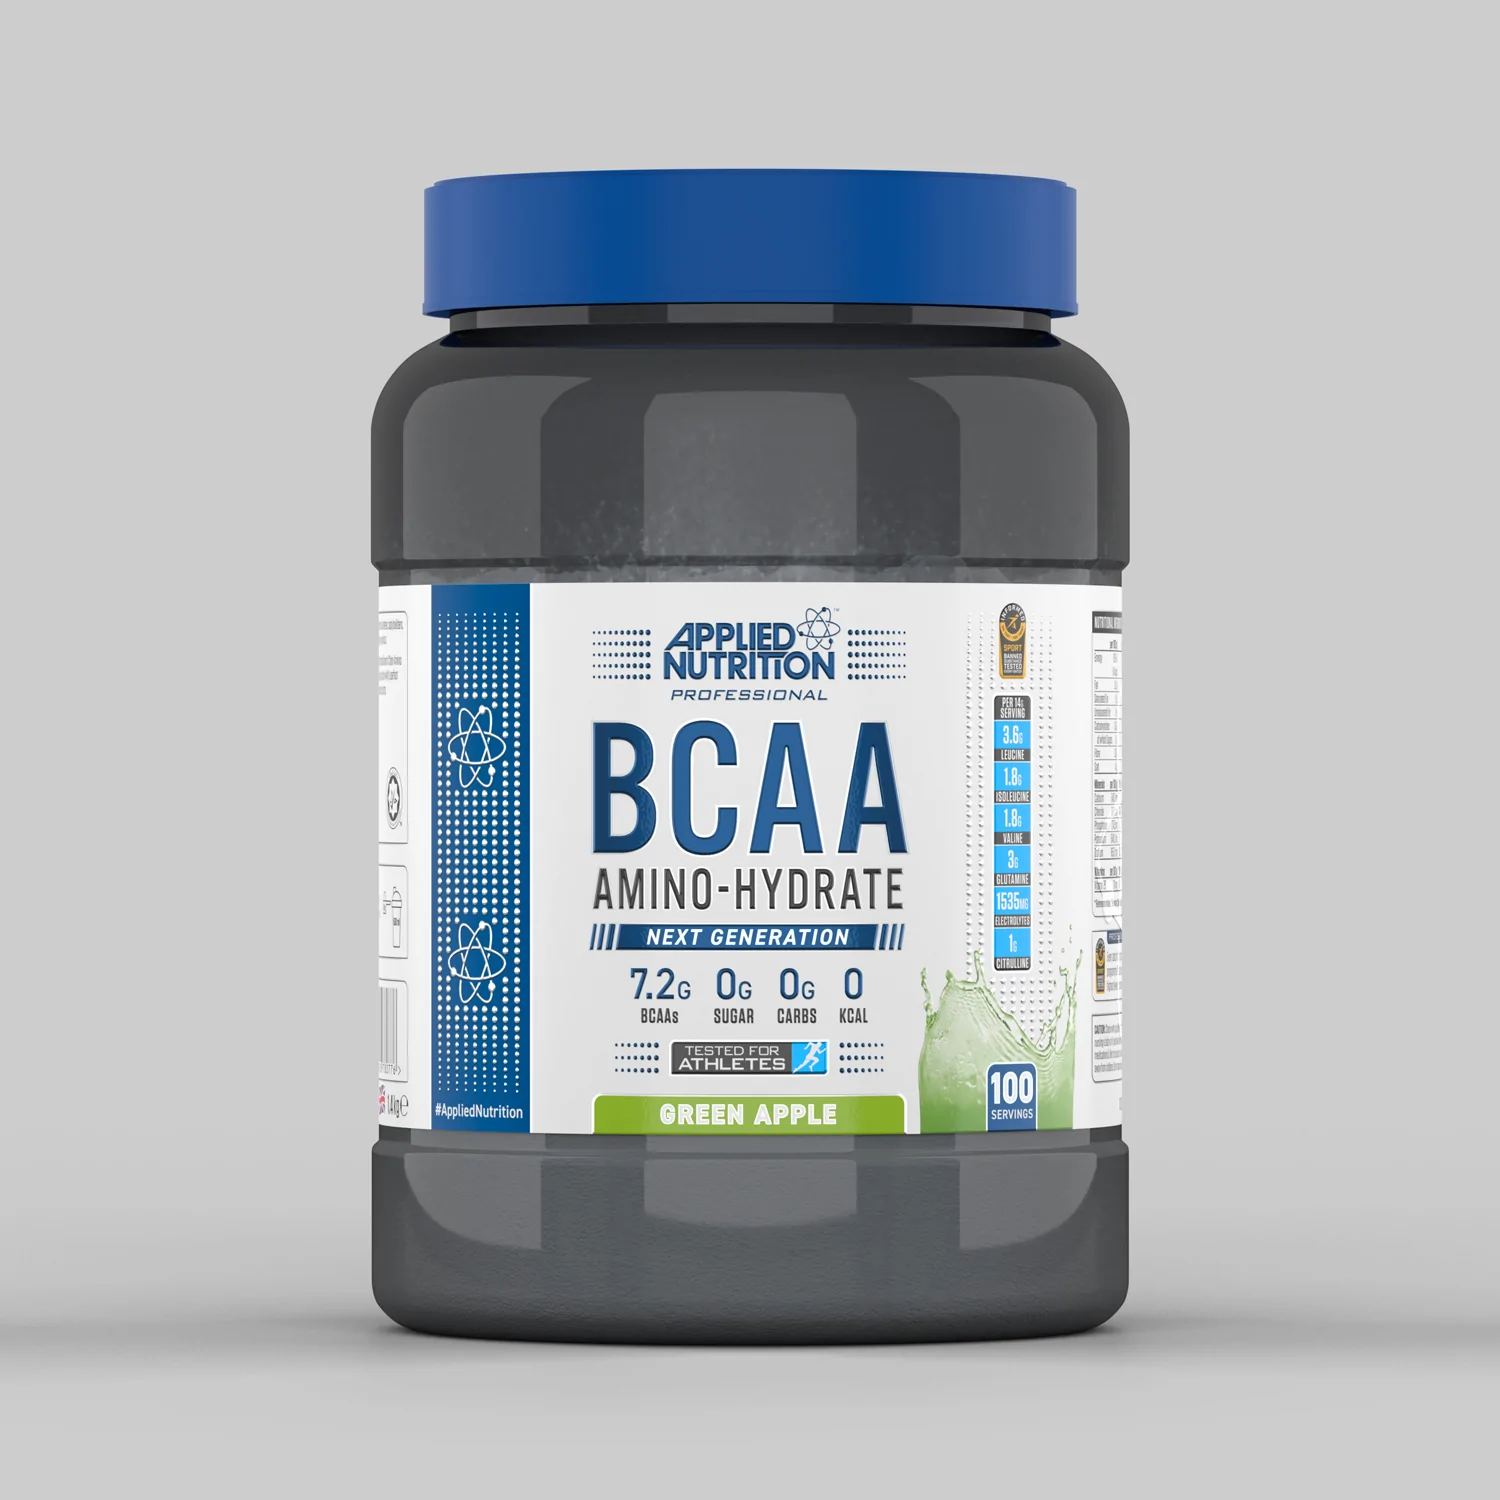 APPLIED NUTRITION BCAA AMINO HYDRATE 450g